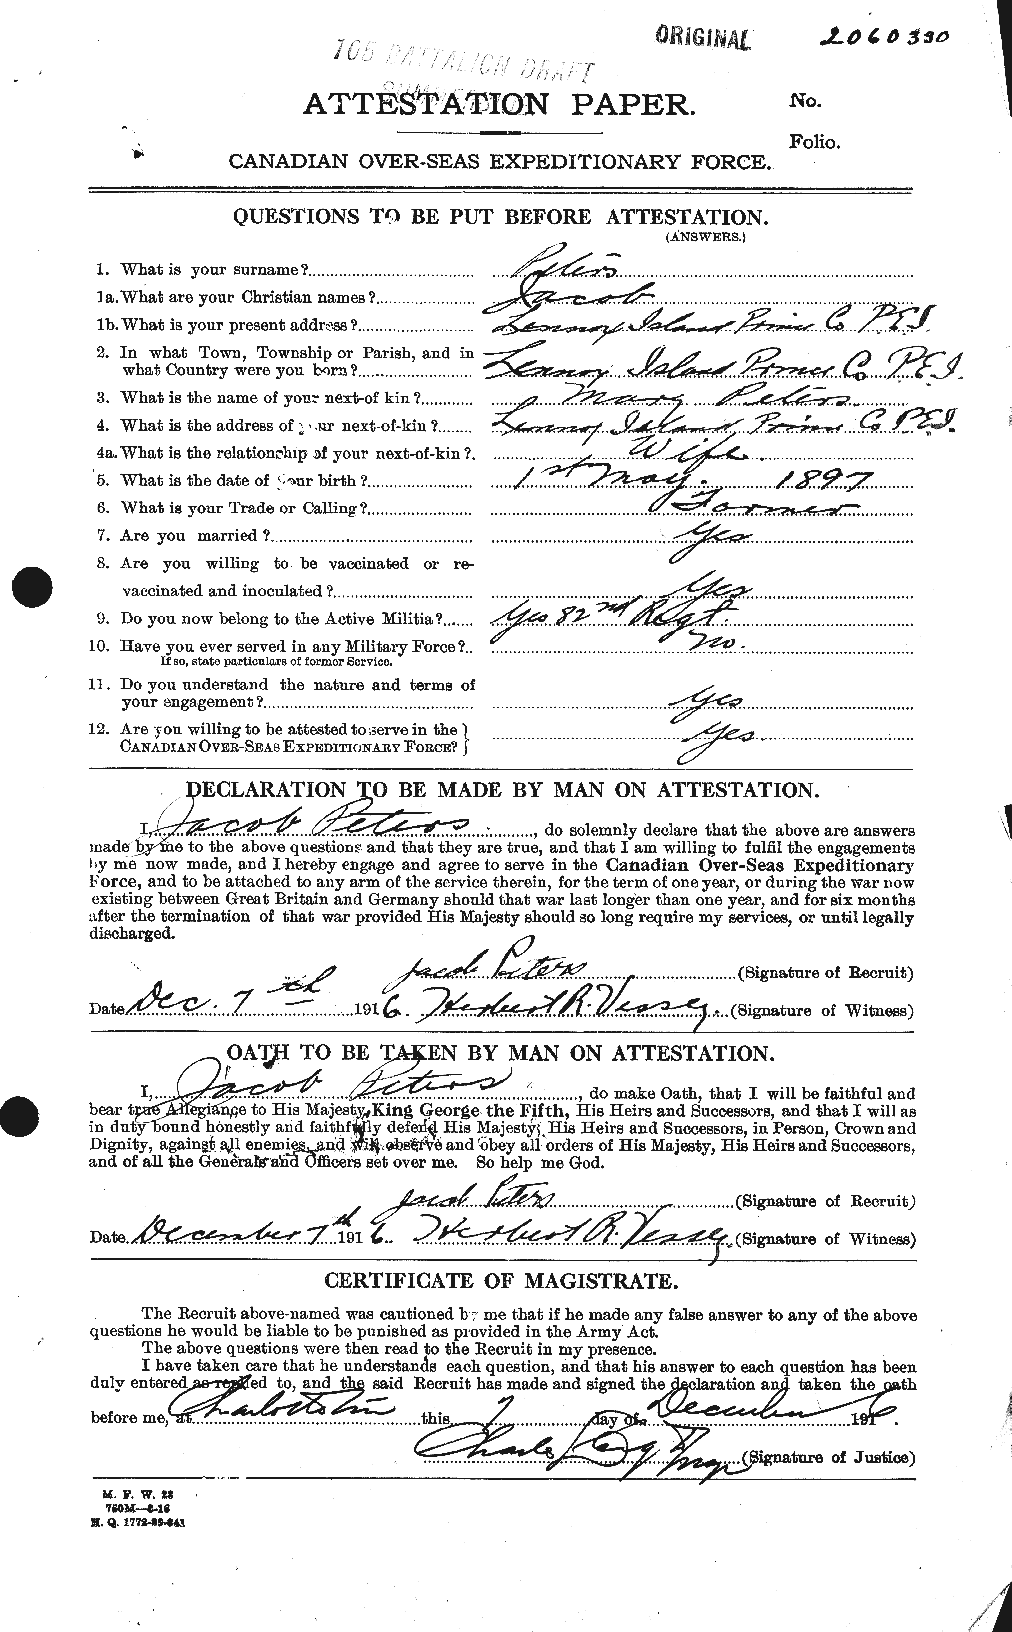 Personnel Records of the First World War - CEF 575512a